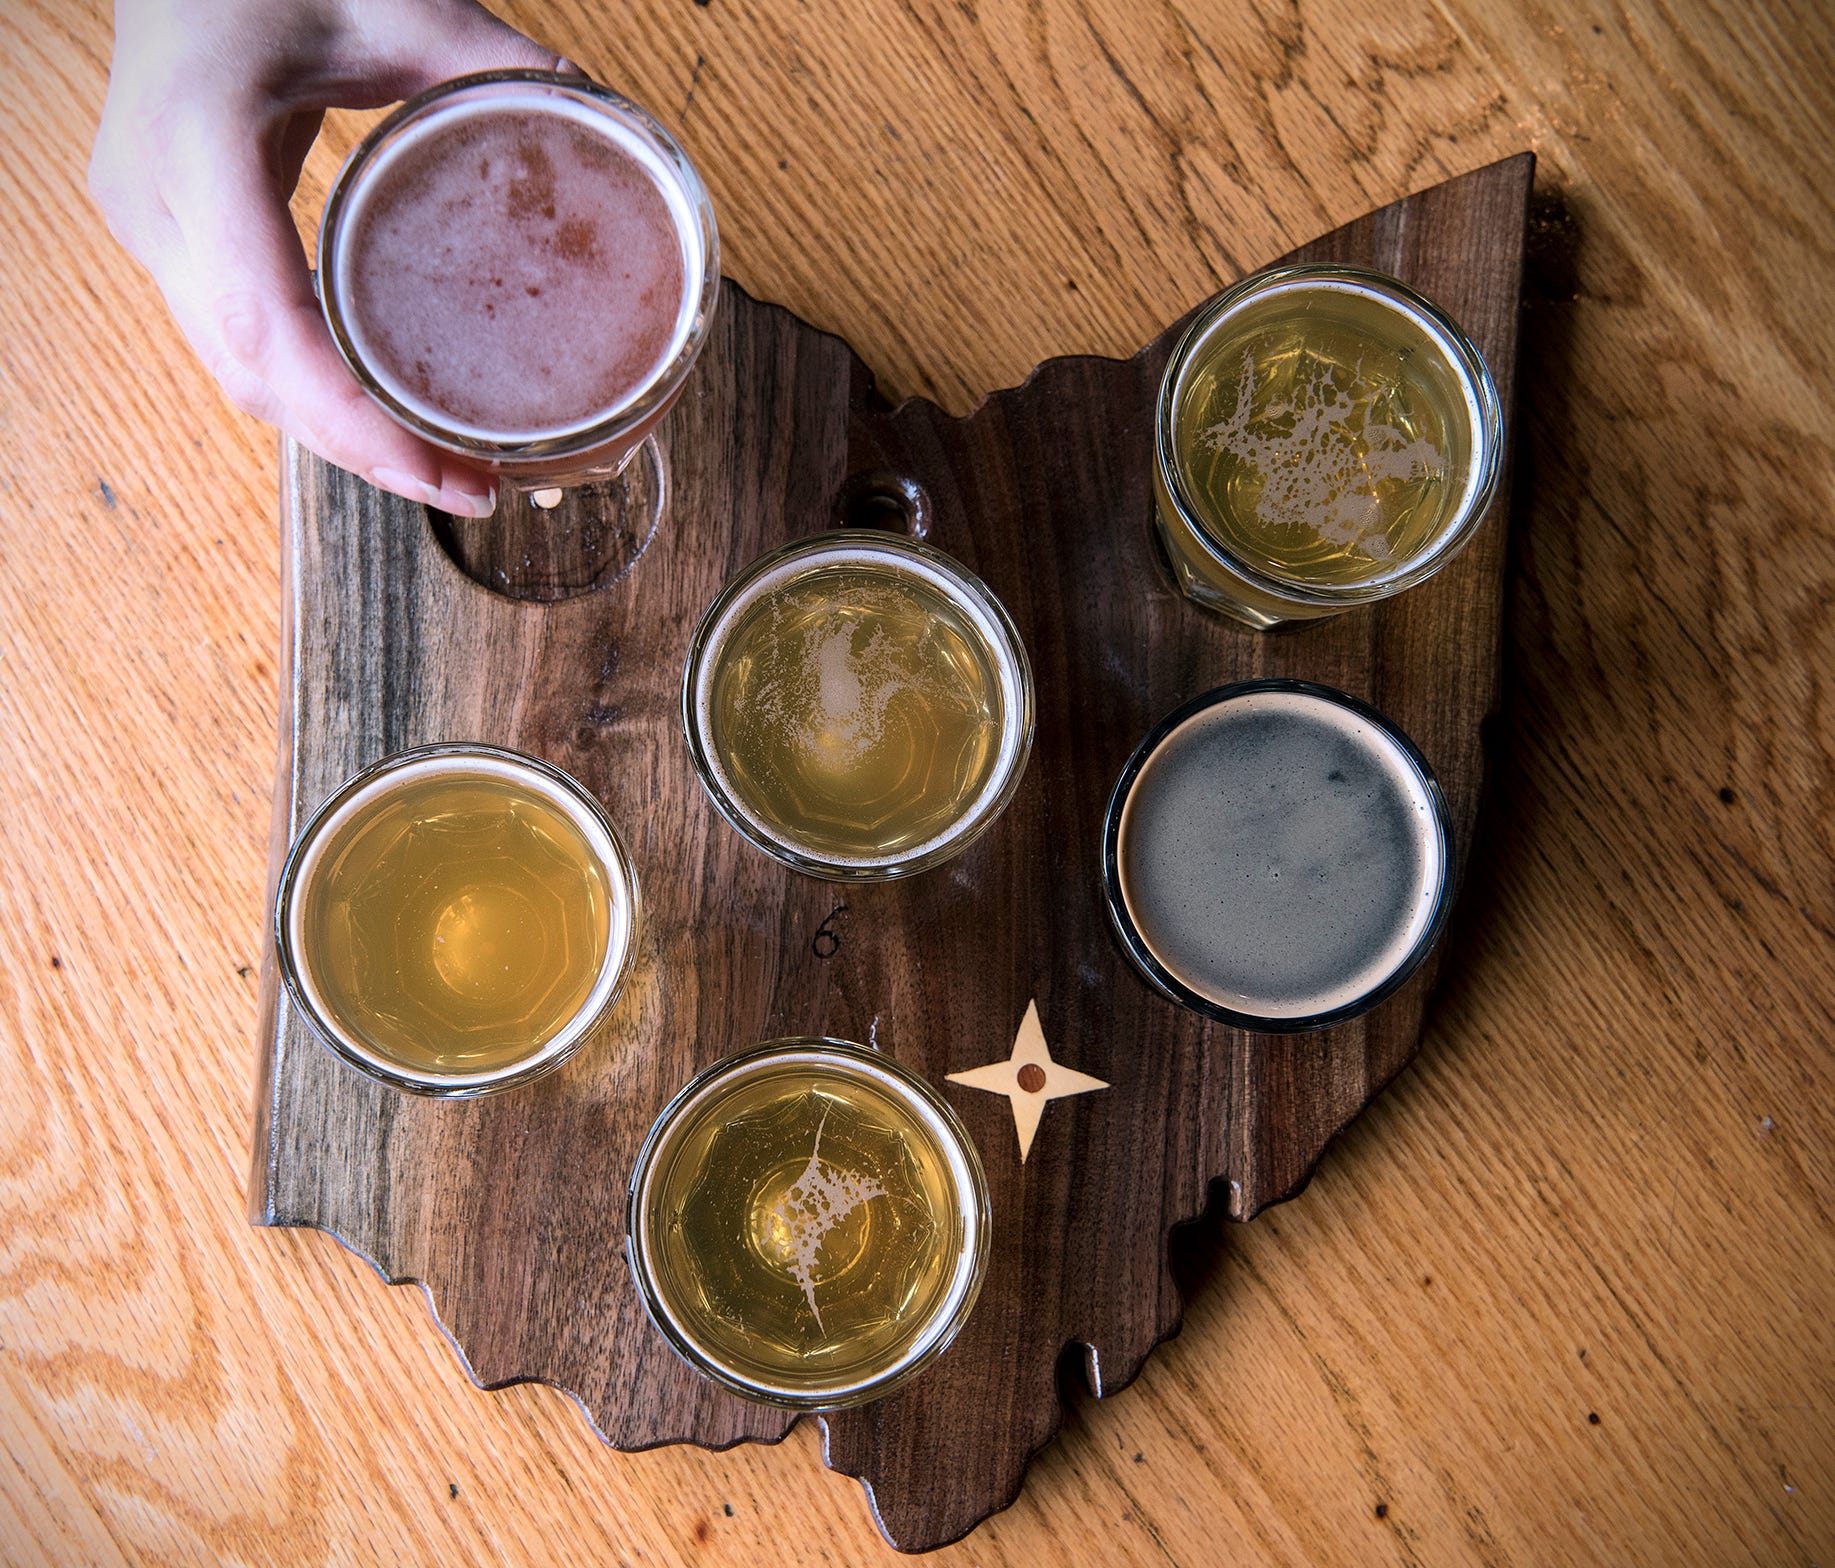 The trail includes Jackie O's Taproom and Production Brewery, which began in 2005, making it the oldest brewery in Athens, Ohio. Customers can purchase a flight of beers served on an Ohio-shaped board.